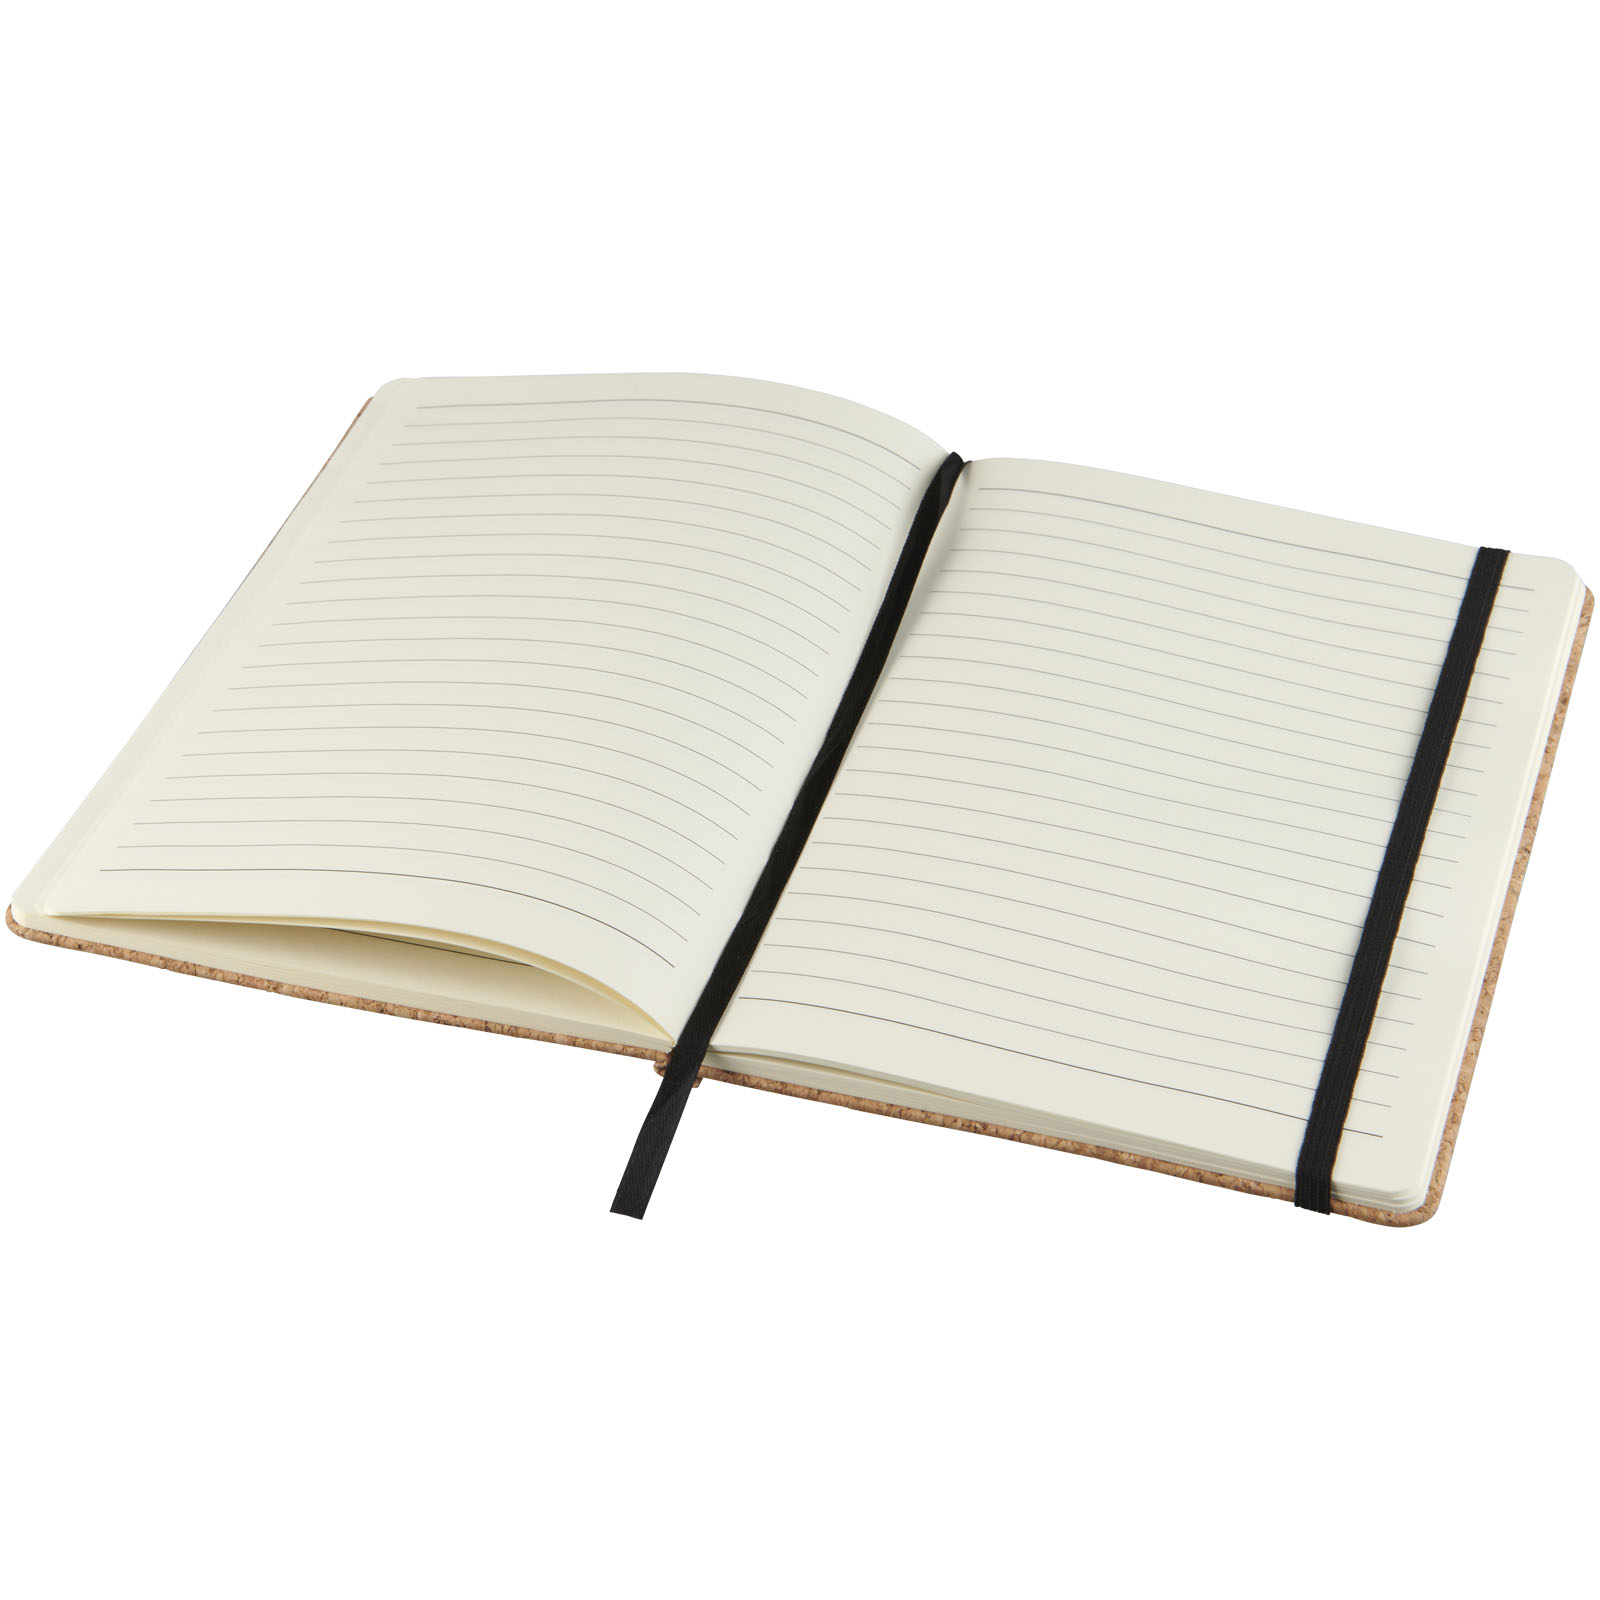 Advertising Hard cover notebooks - Napa A5 cork notebook - 3